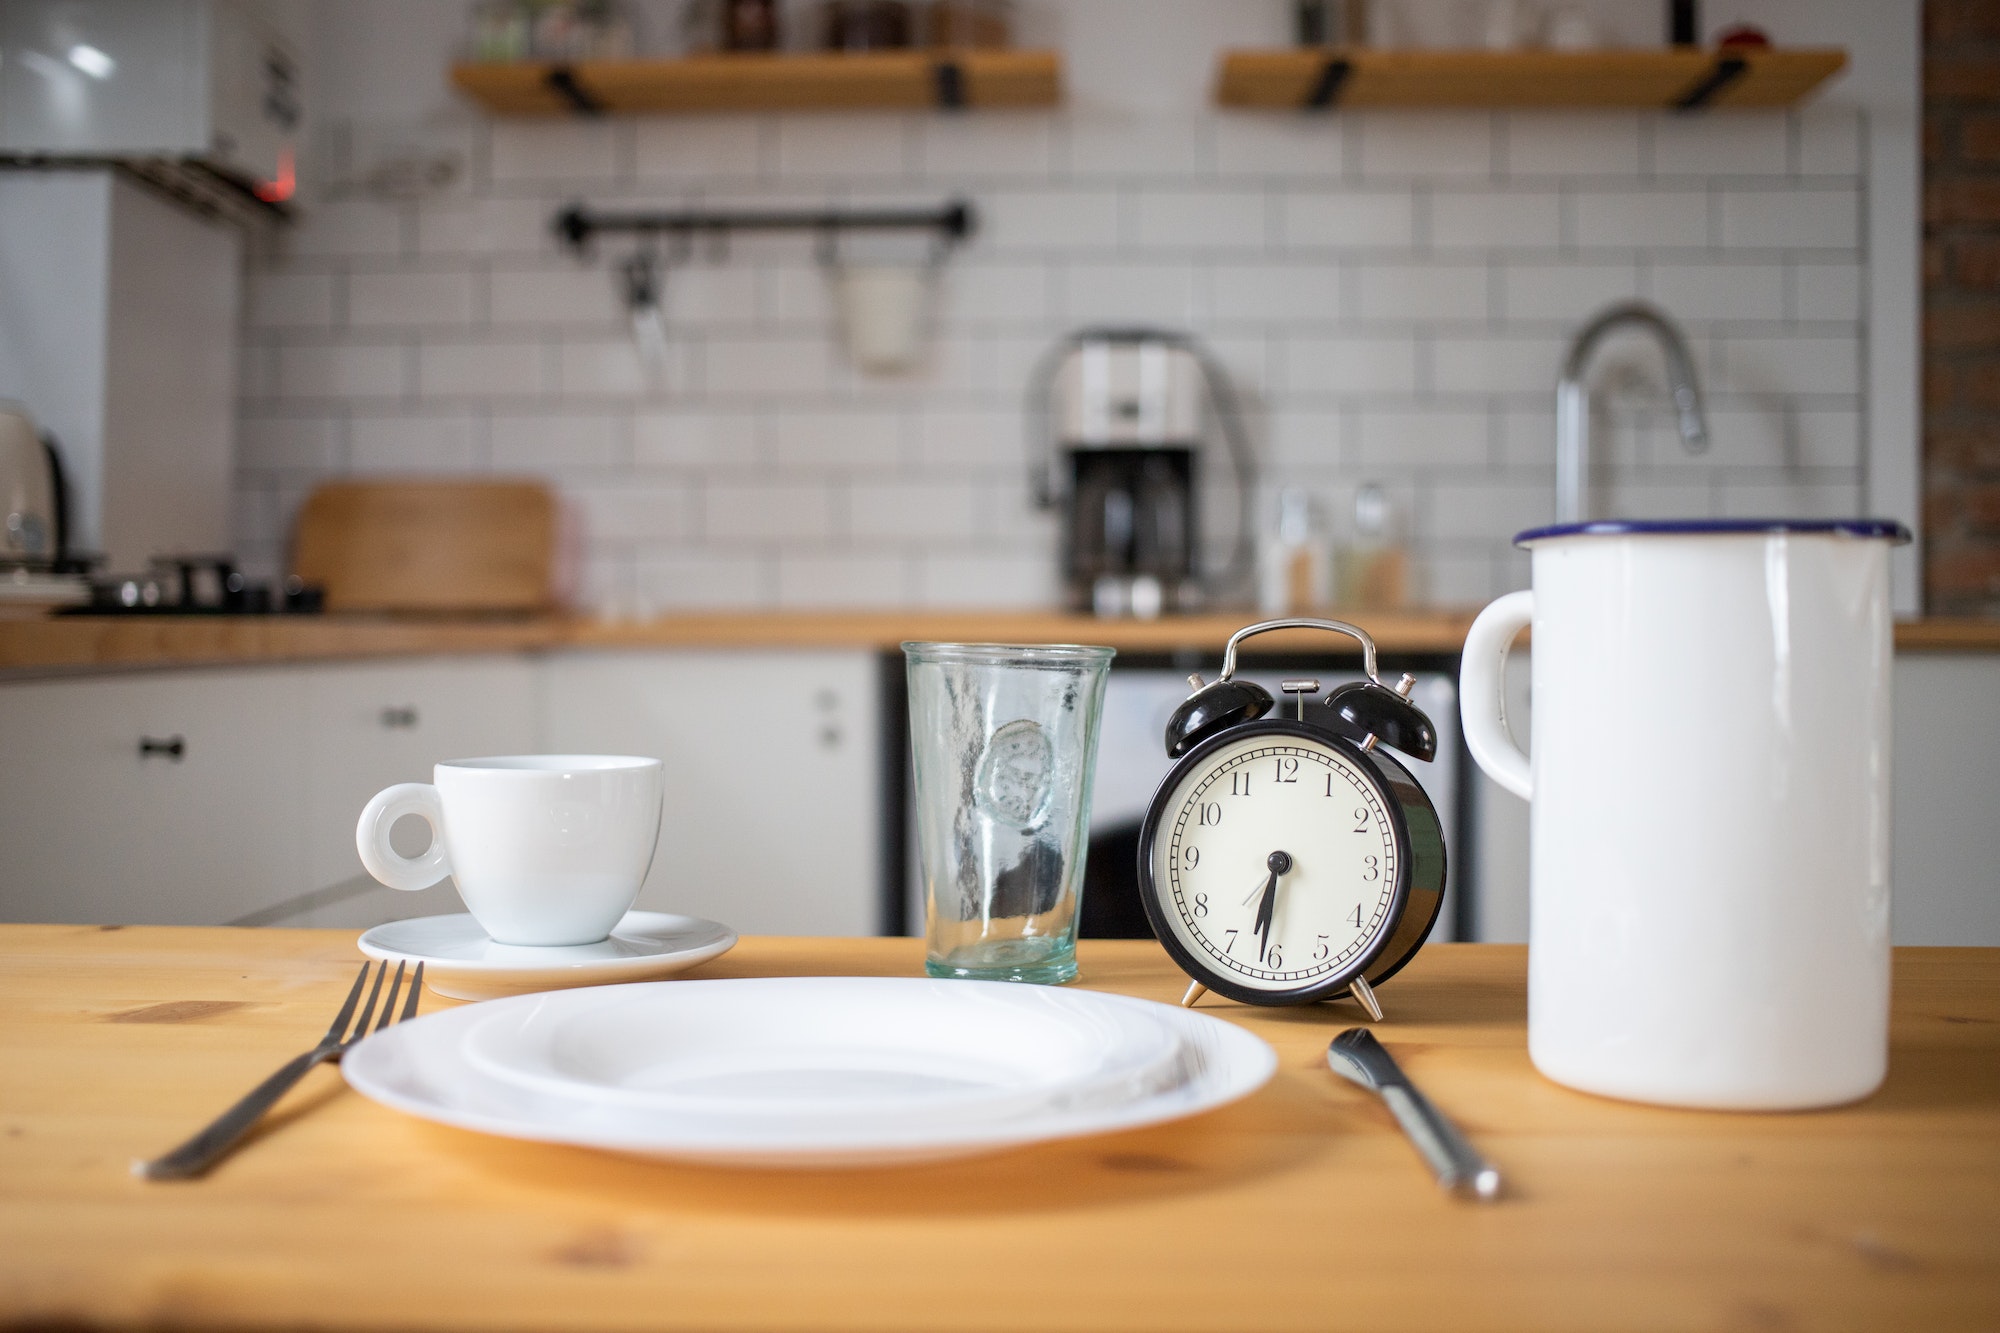 intermittent fasting concept alarm clock on kitchen table